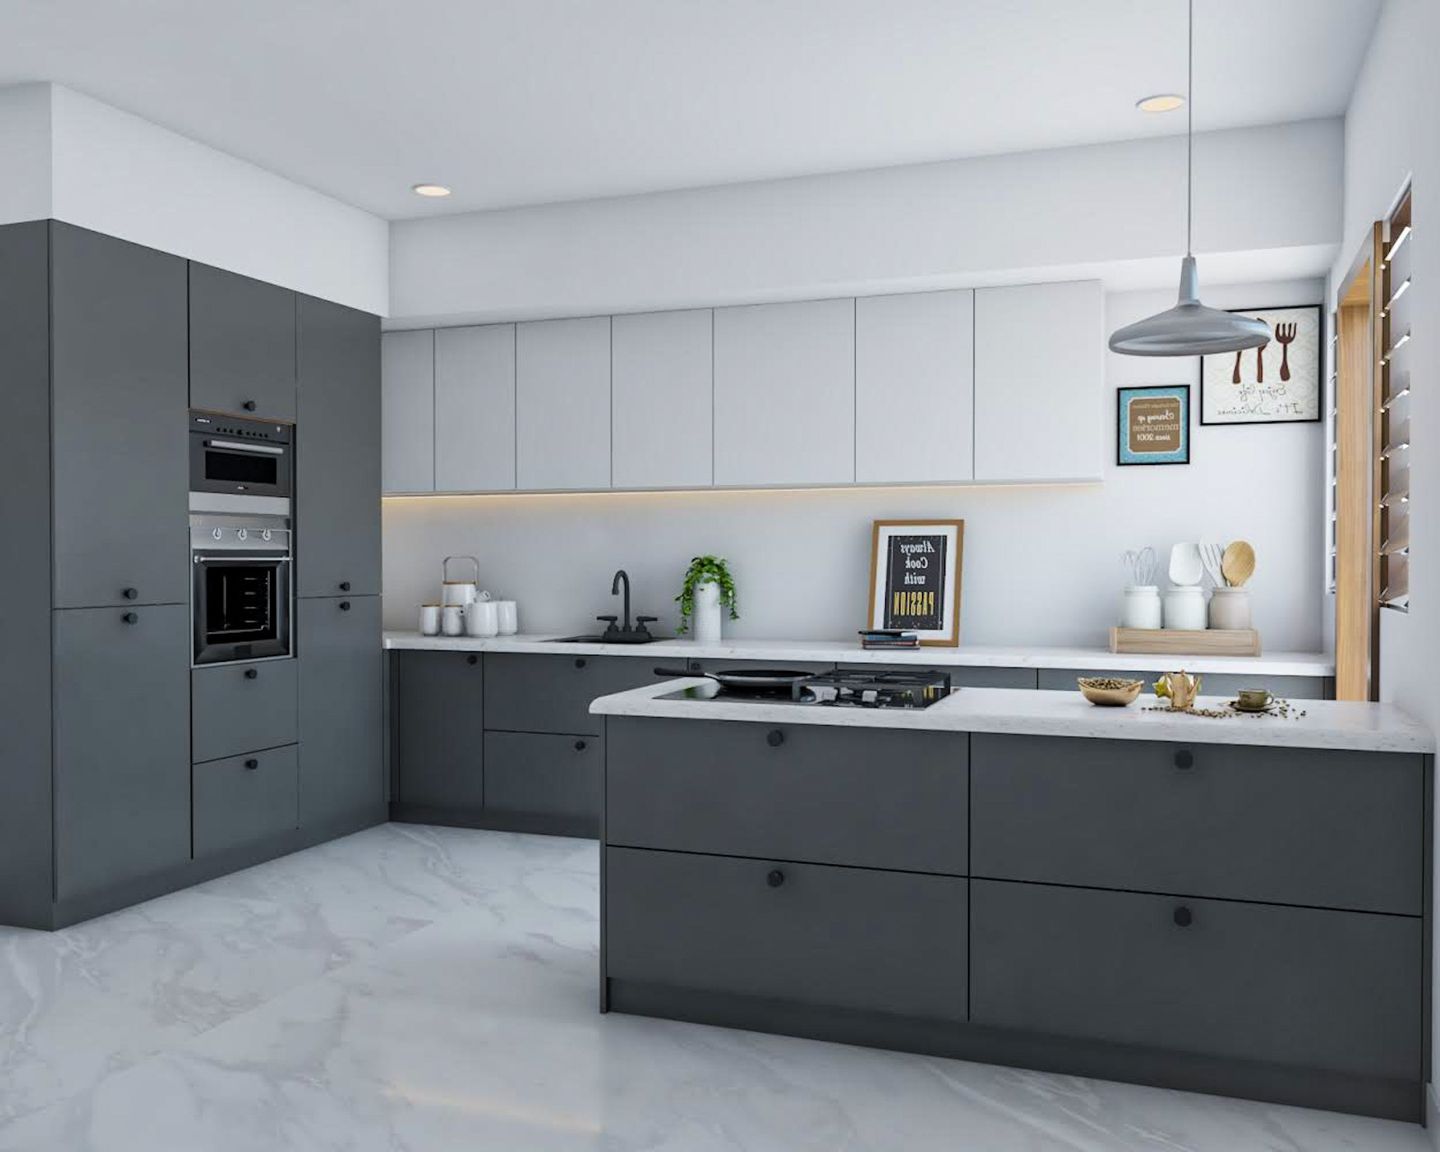 Contemporary Kitchen Design With Grey And White Hues - Livspace